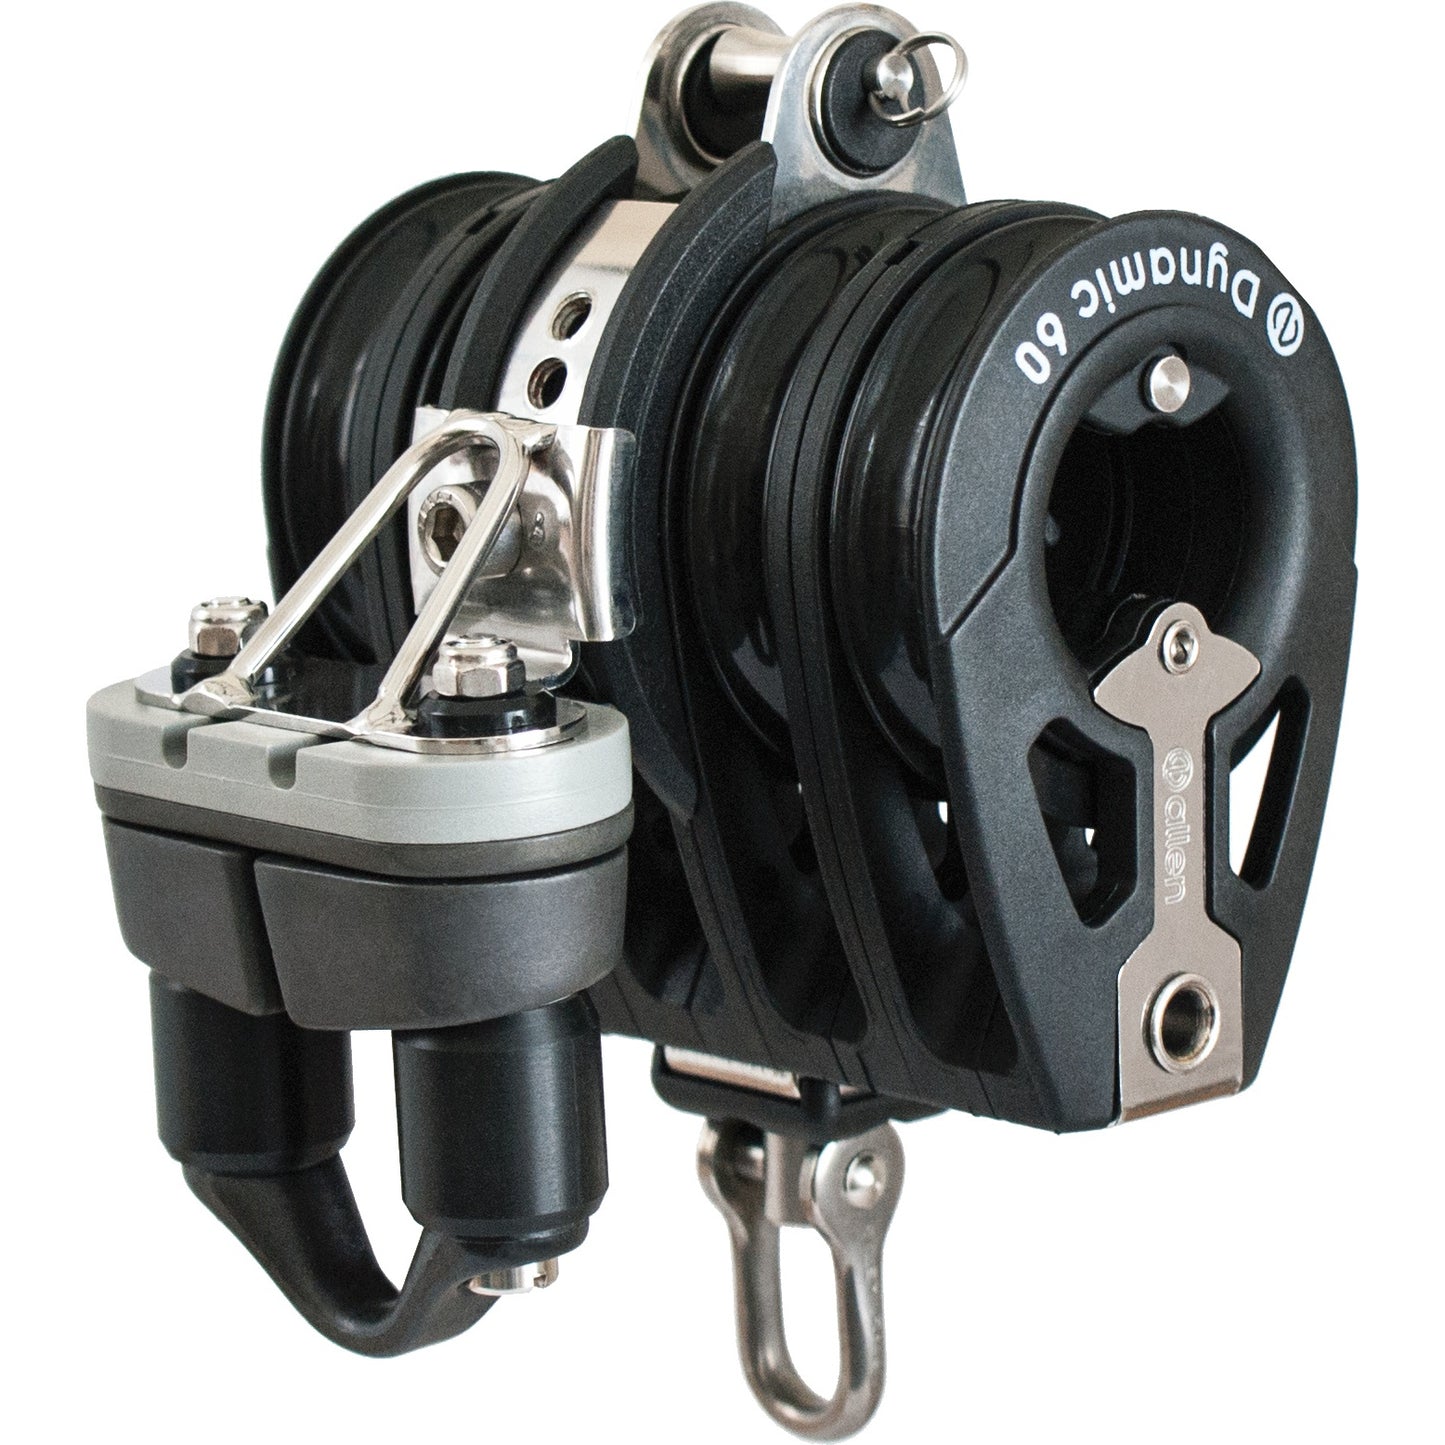 Allen Quintuple 50mm switchable ratchet with becket and adjustable cleat - Dinghy Shack